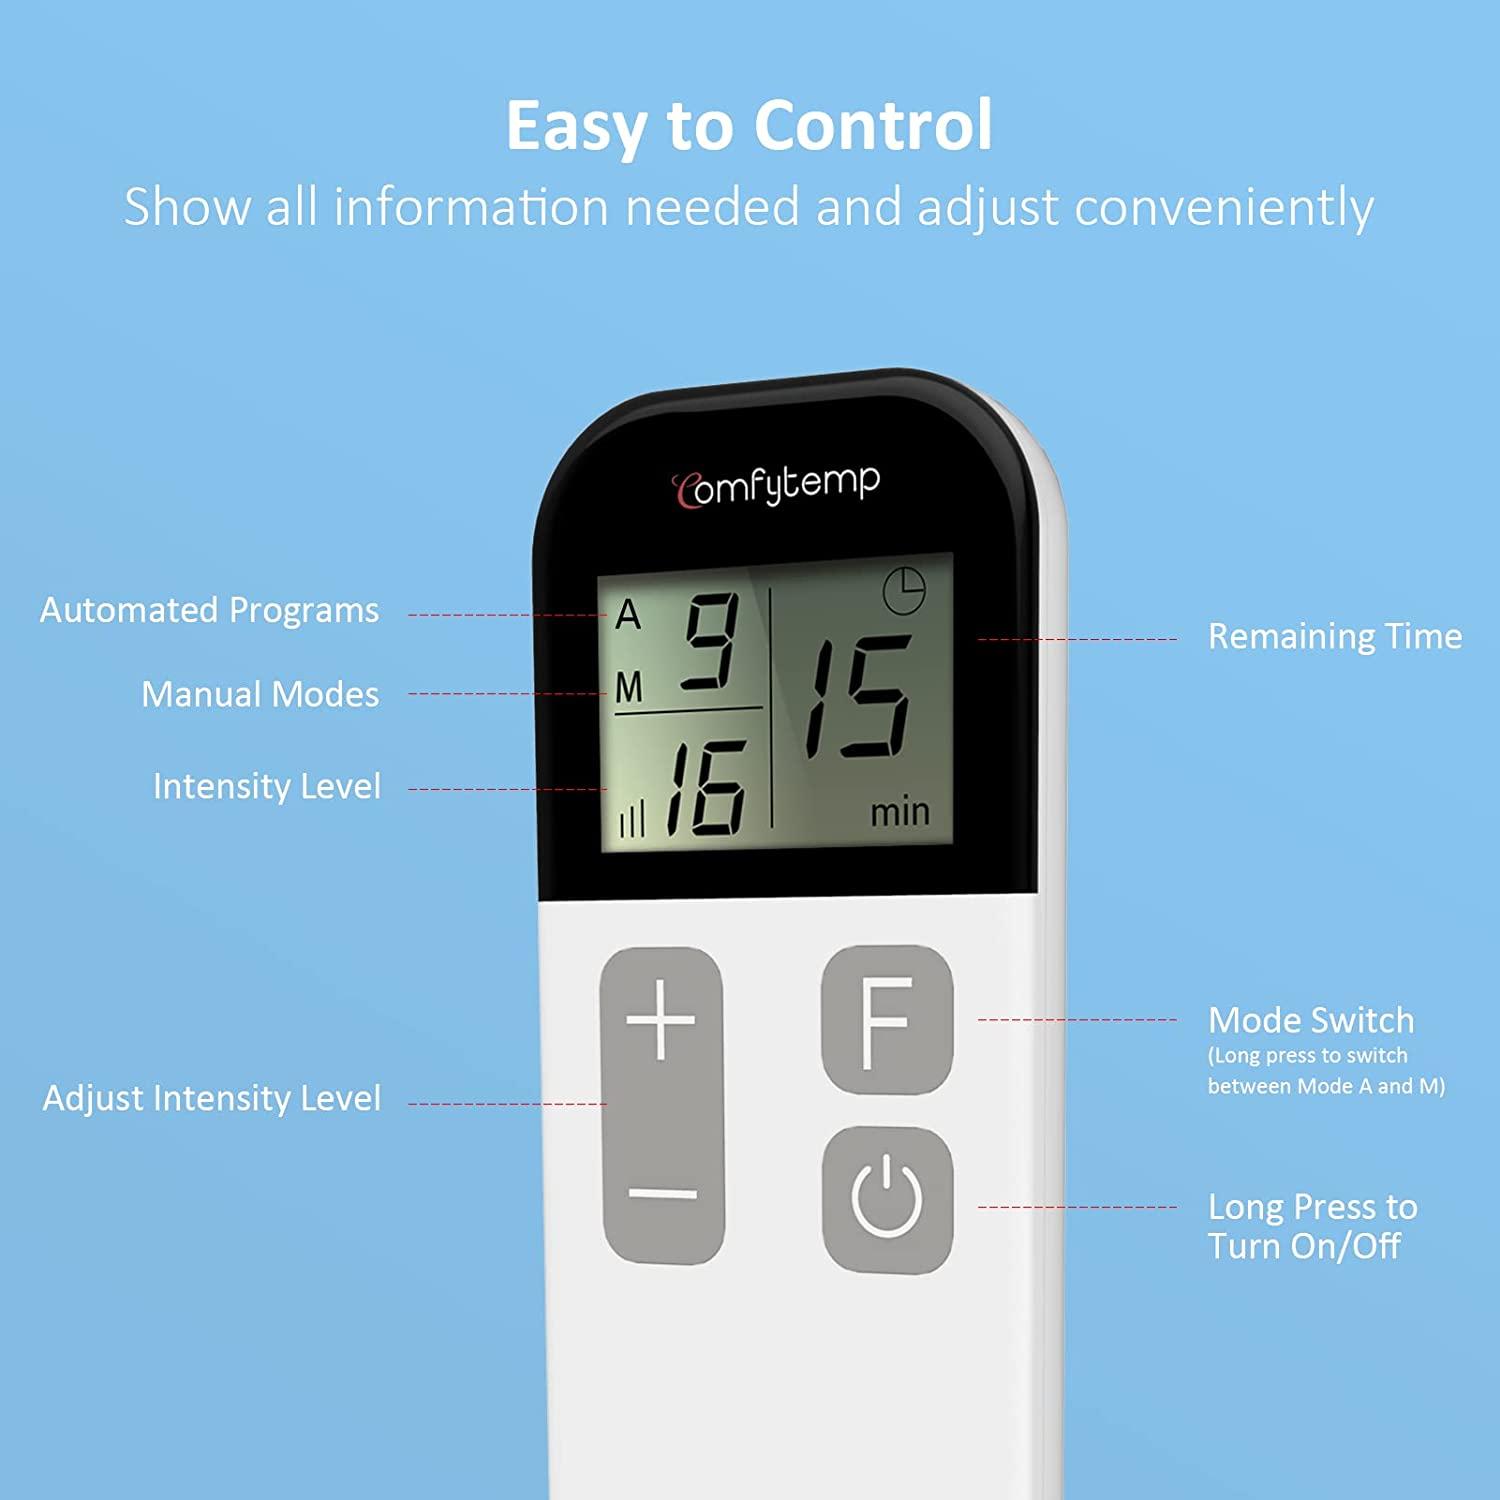 Comfytemp 4 Outputs TENS Unit Muscle Stimulator for Pain Relief, Unlimited  Mode (24 Modes with DIY) EMS TENS Stim Machine Back Pain Relief Products